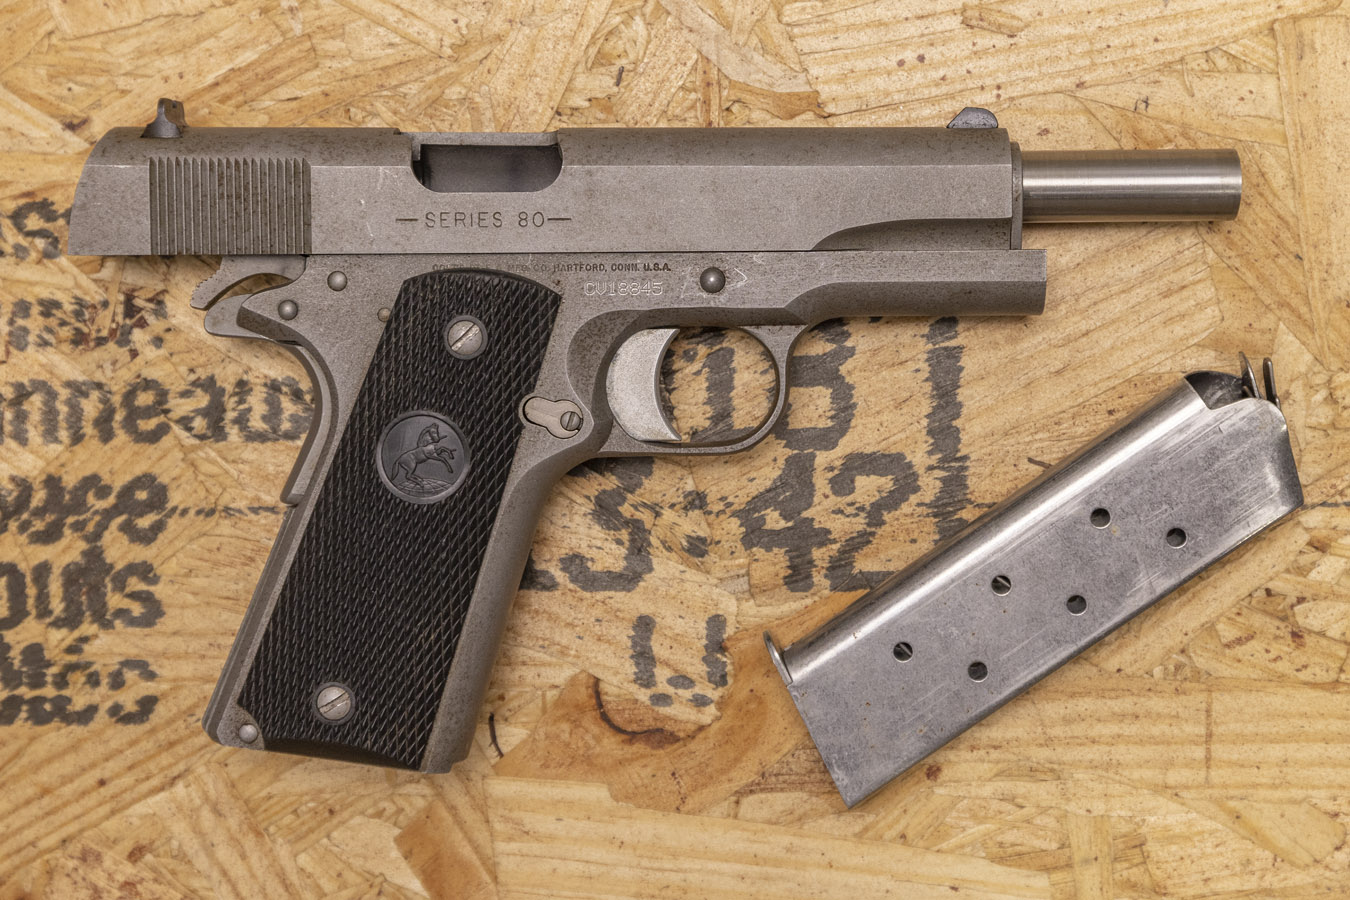 No. 10 Best Selling: COLT M1991A1 .45 ACP POLICE TRADE-IN PISTOL